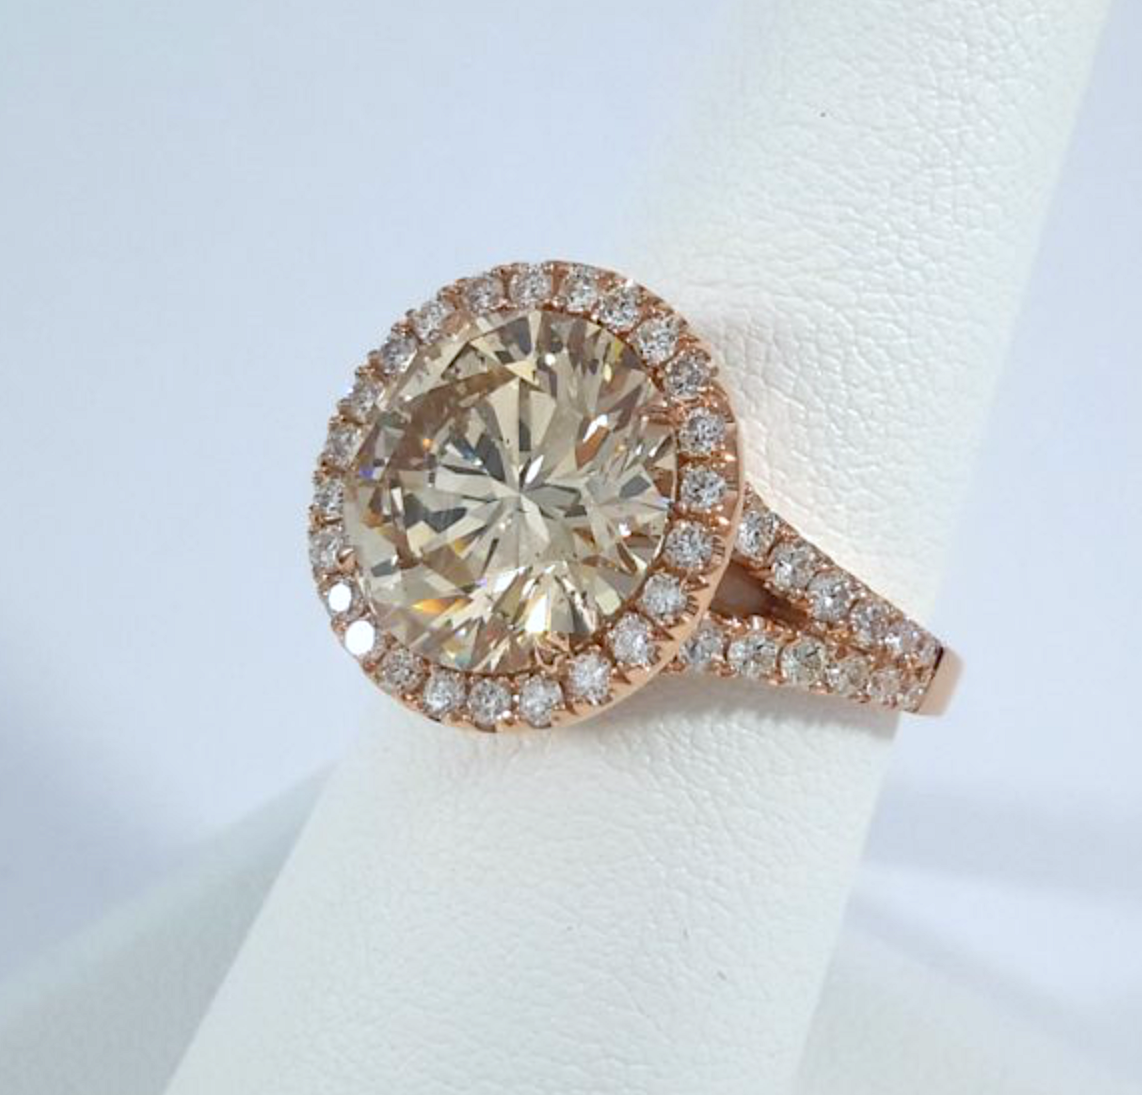 18kt 7.11ct Round Diamonds Engagement  Ring  Pink Gold Halo JEWELFORME BLUE 900,000 GIA EGL certified Diamonds